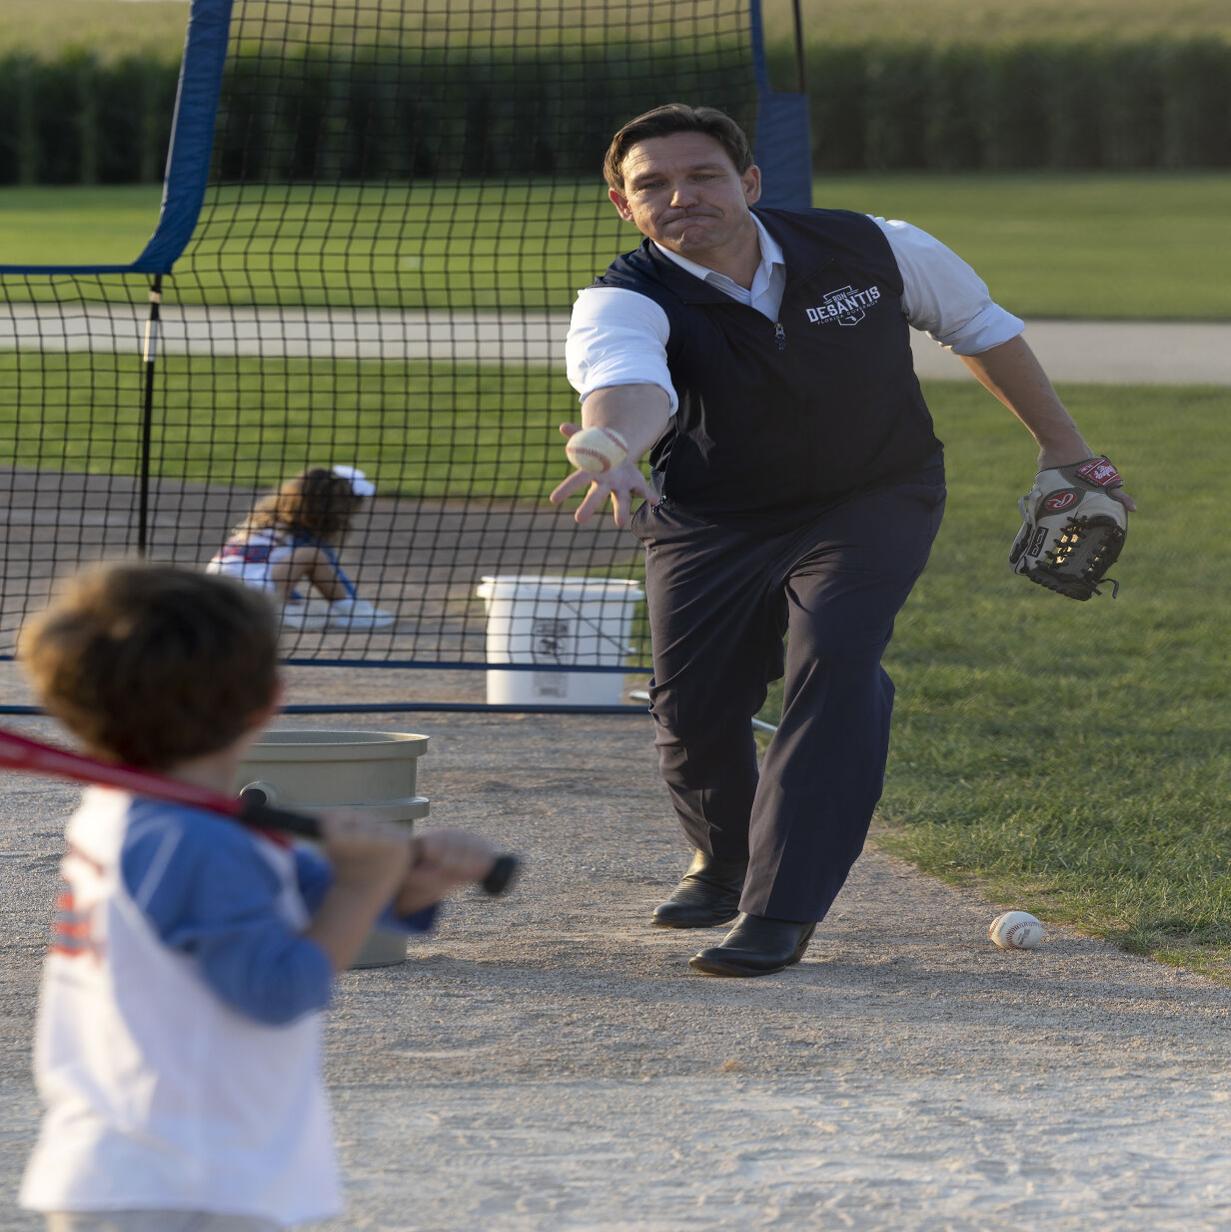 DeSantis makes pitch at Field of Dreams, Tri-state News